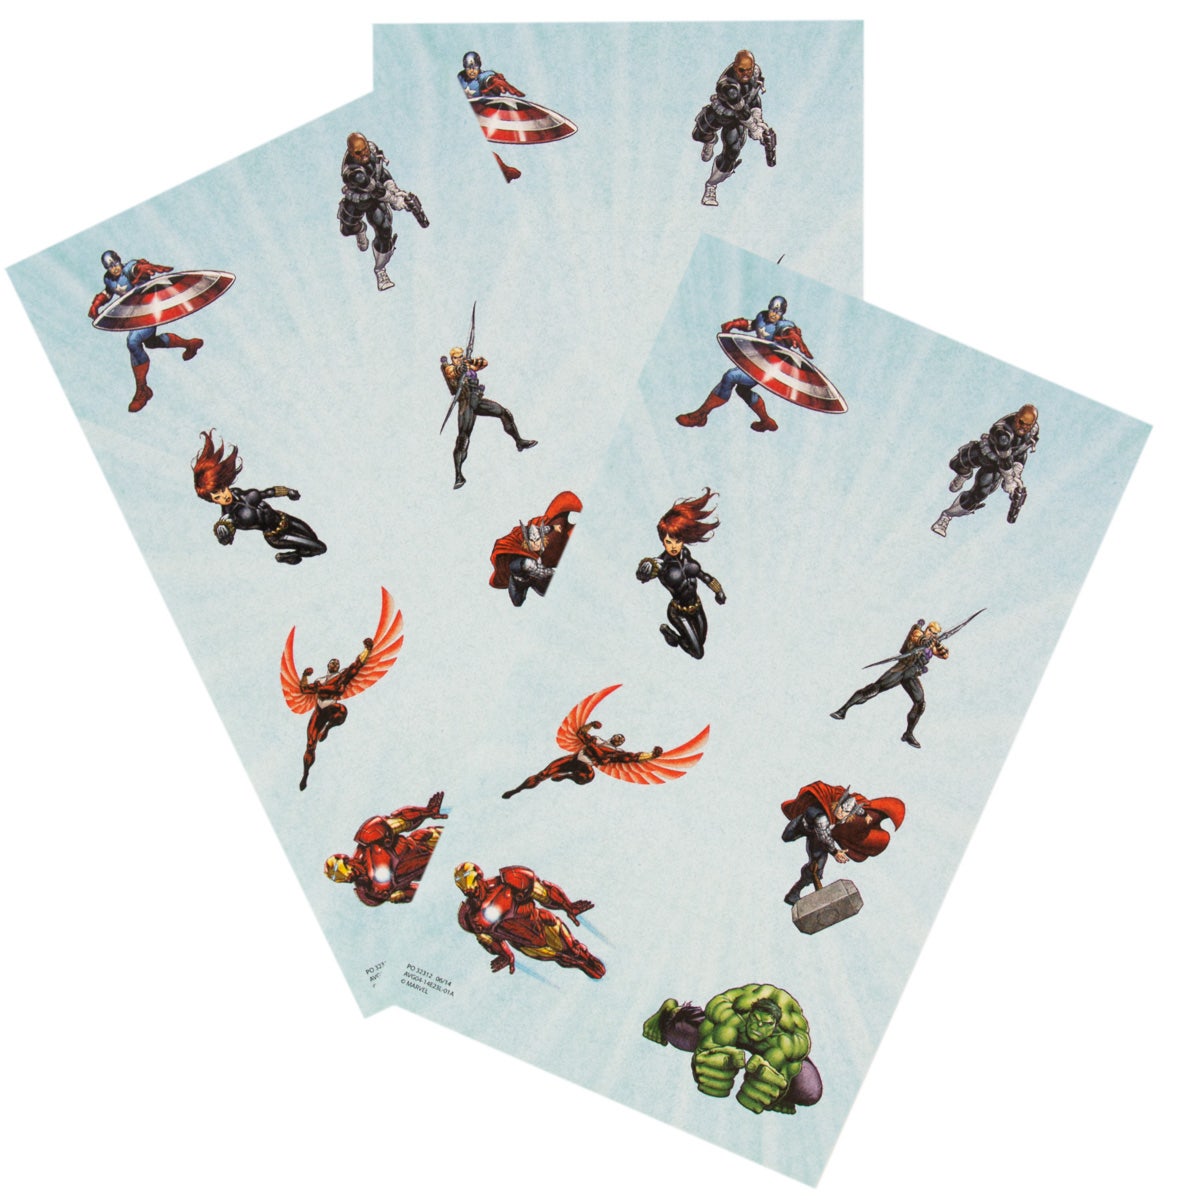 24pc Heroes Stickers Set – Fun Movie Characters For Kids